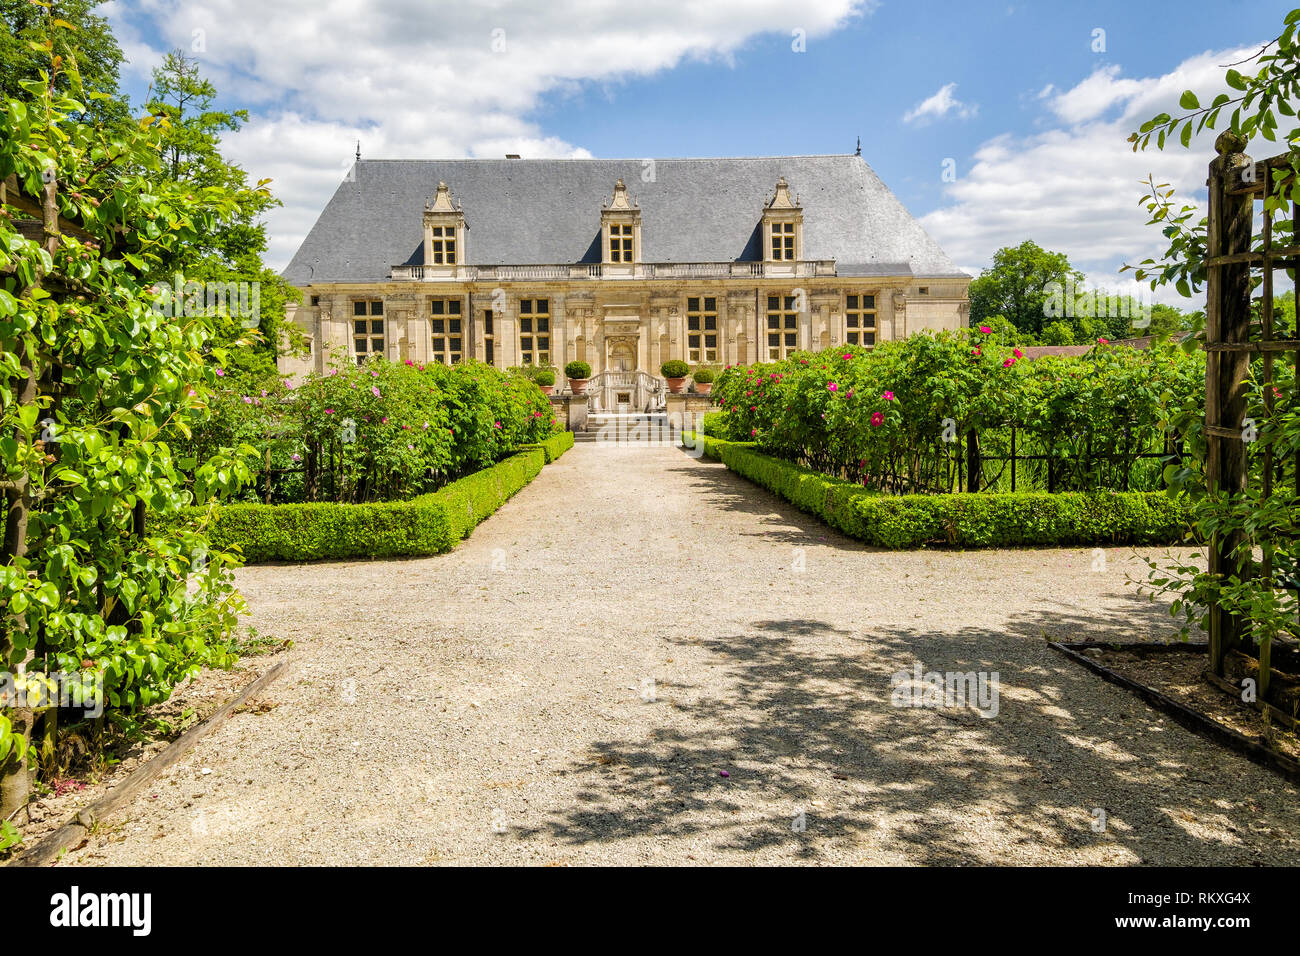 In Joinville, France is the Chateau du Grand Jardin.  It was a maison de plaisance and garden attached to the French seat at Joinville, Haute-Marne. Stock Photo